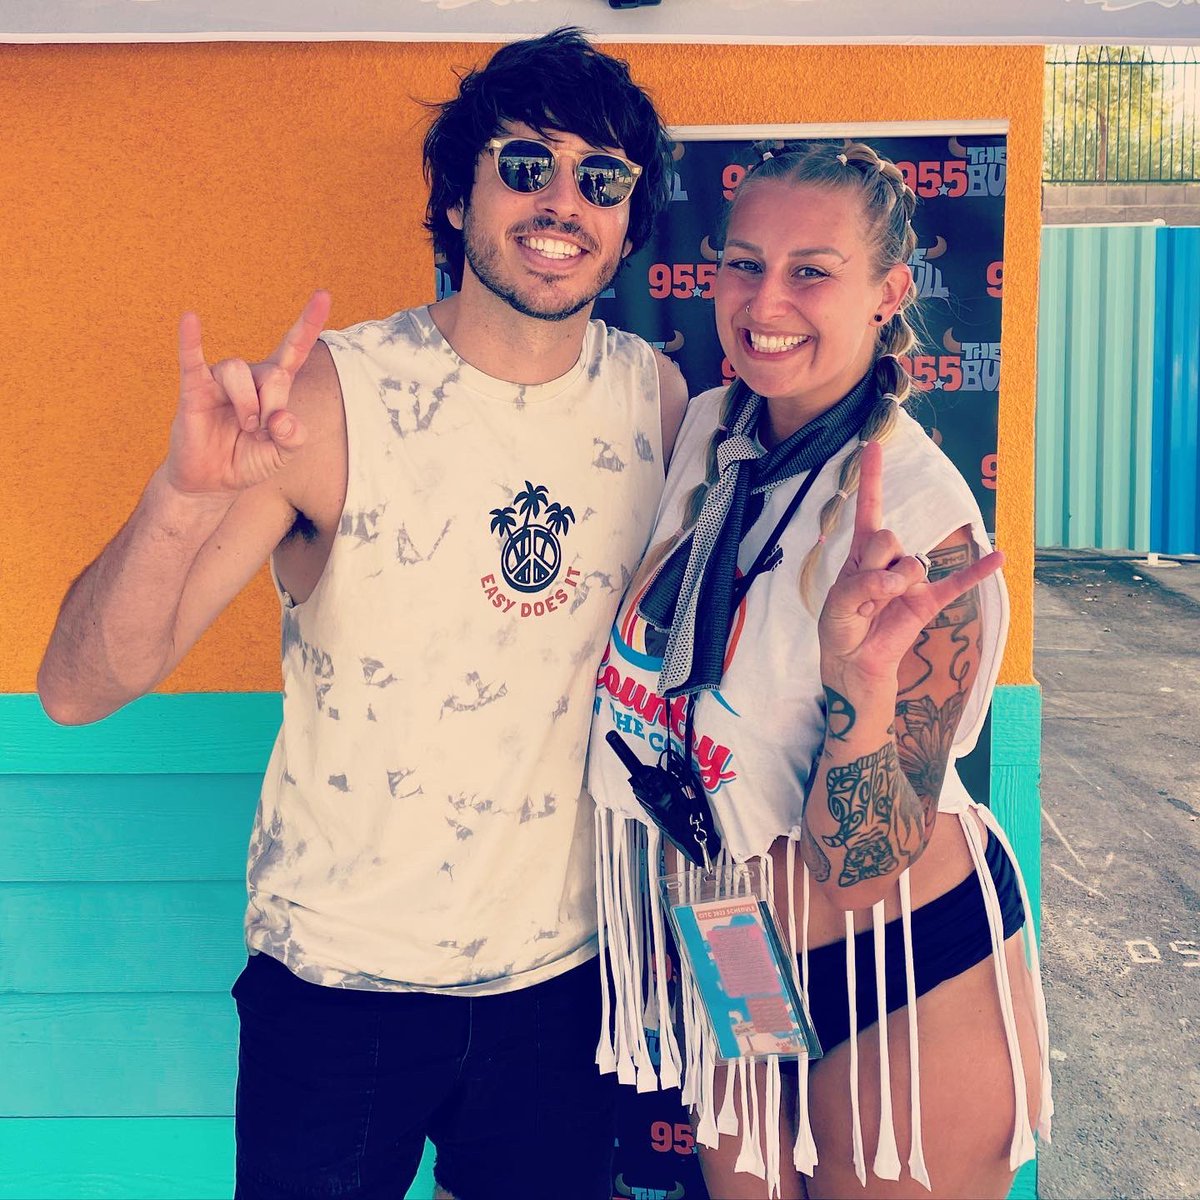 What. A. Day! #LasVegas, you showed UP yesterday at #CITC23! Let’s do it all over again next year, shall we!? PS @Morgan_Evans is a babe. 🤩🤘🏼🧊👙💦 @CowabungaVegas #countryinthecove @955thebull #chapmandcjrlasvegas @JohnnieWalkerRV